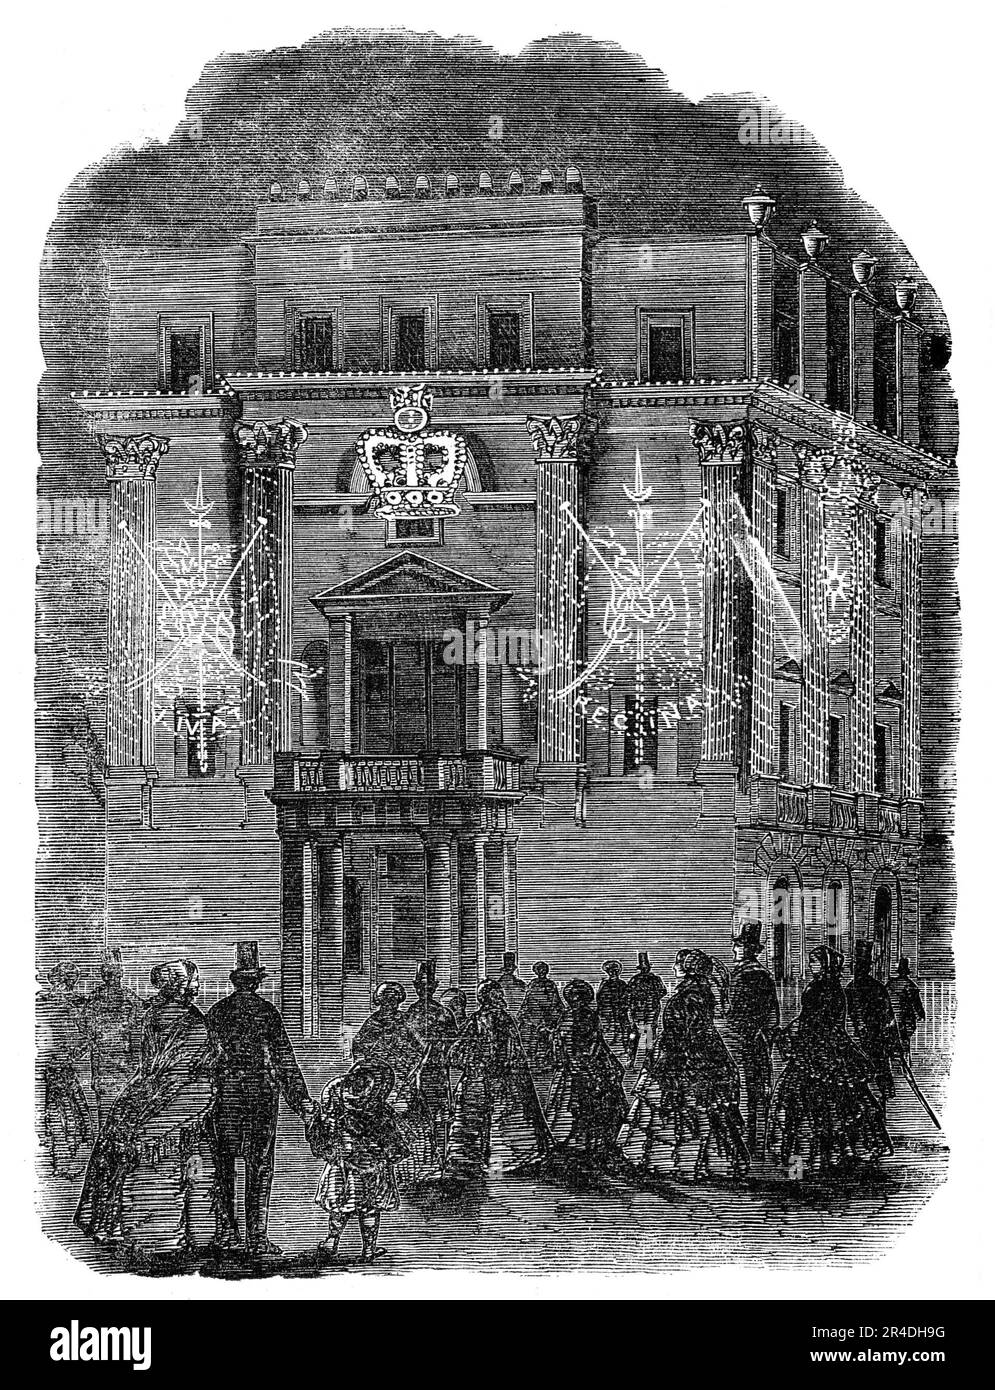 The Peace Illumination - Right Hon. Lord Panmure's (Minister-at-War), Belgrave-Square, 1856. London celebrations to mark the end of the Crimean War. 'It was necessary that the people should share, or appear to share, in the joy felt by the official mind that diplomacy had put an end to that very inconvenient and very troublesome war in which Great Britain was incurring such large expense, and reaping such small satisfaction...it was resolved to celebrate the auspicious birthday of the Queen and the inauspicious Treaty of Peace on the same evening...the illuminations that are customary to expre Stock Photo